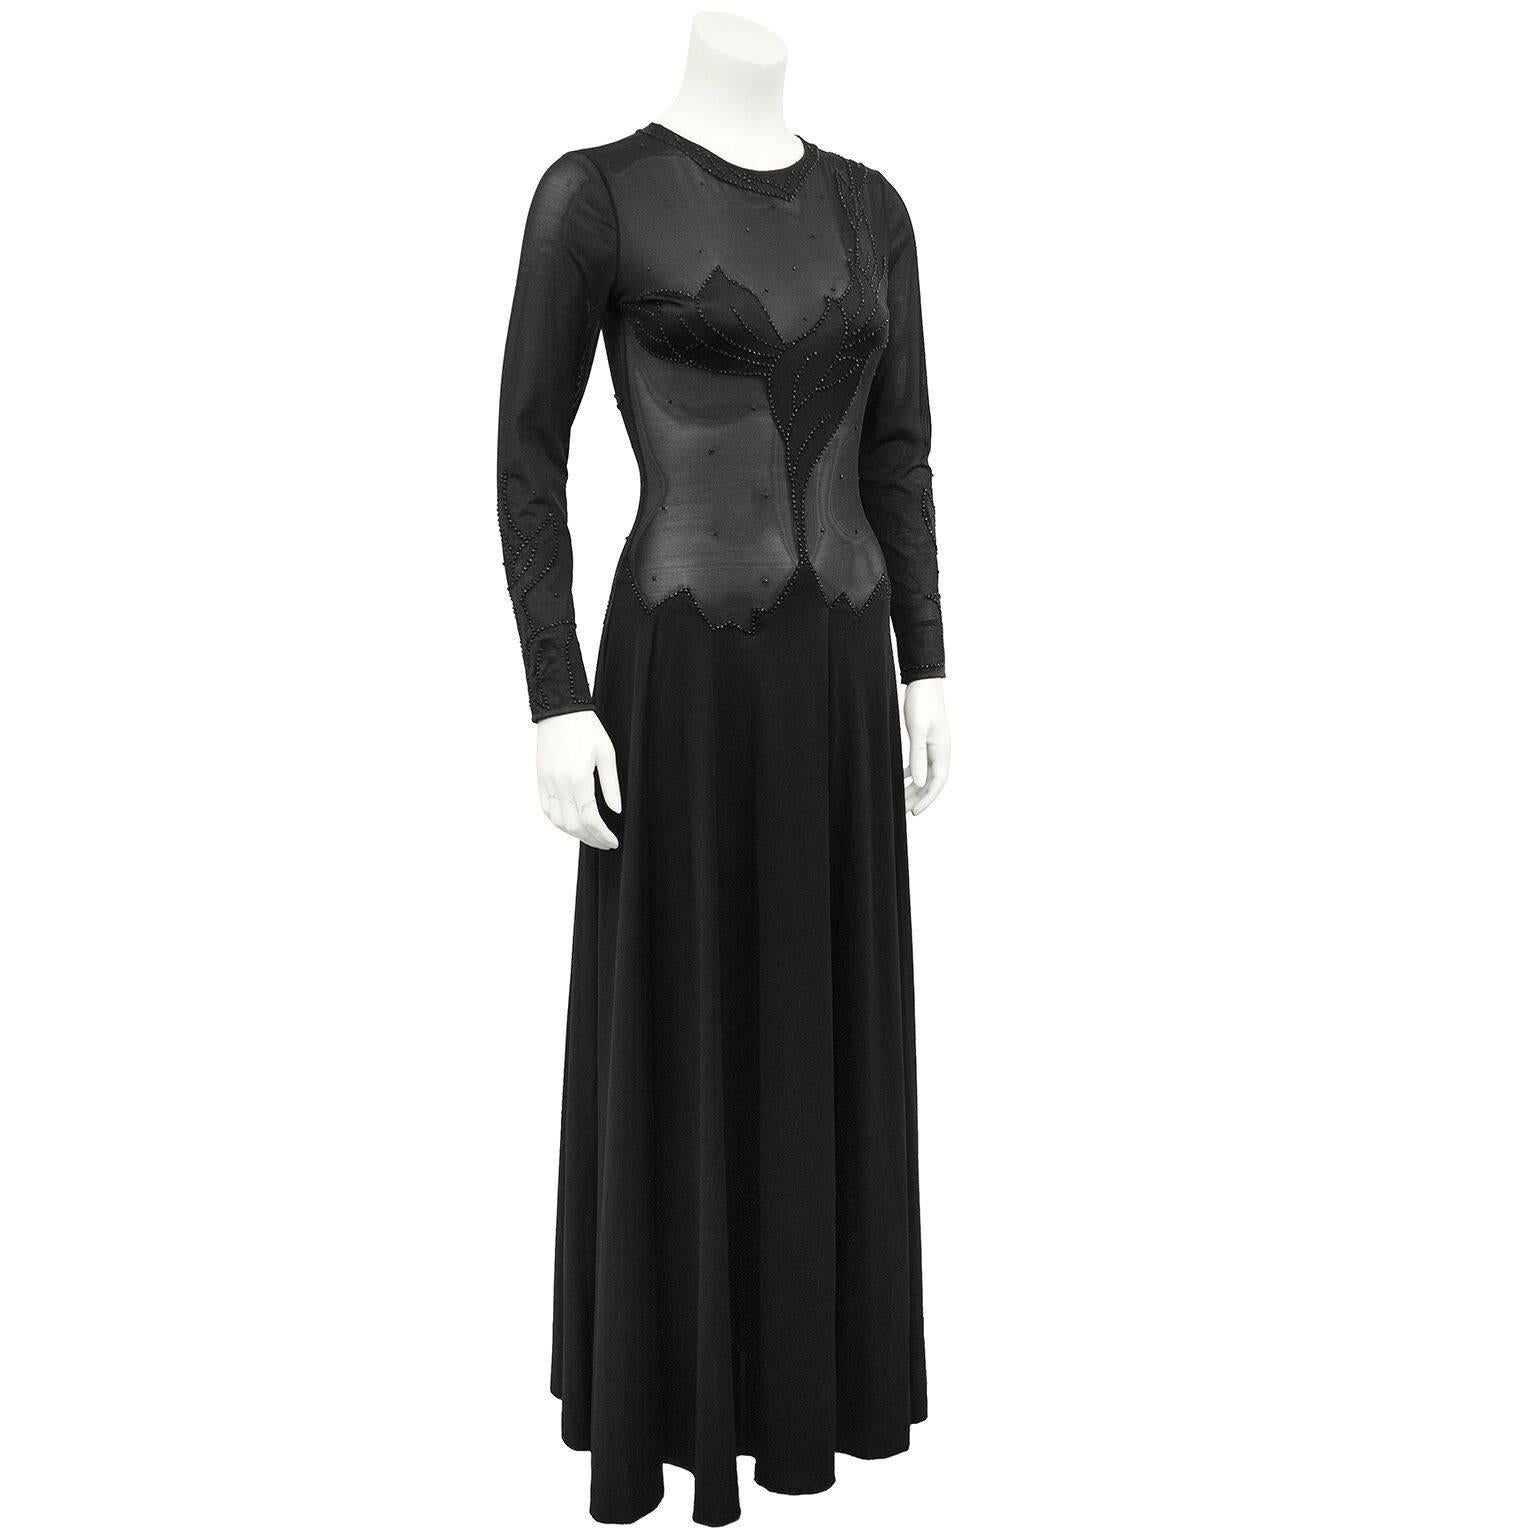 Stunning early 1970s Giorgio Di Sant’Angelo black illusion gown. Stretch lycra long sleeve, sheer bodice with hand floral beading and rhinestones. Key hole detail at nape of neck with a button closure. Full skirt starts at hips. Perfect red carpet